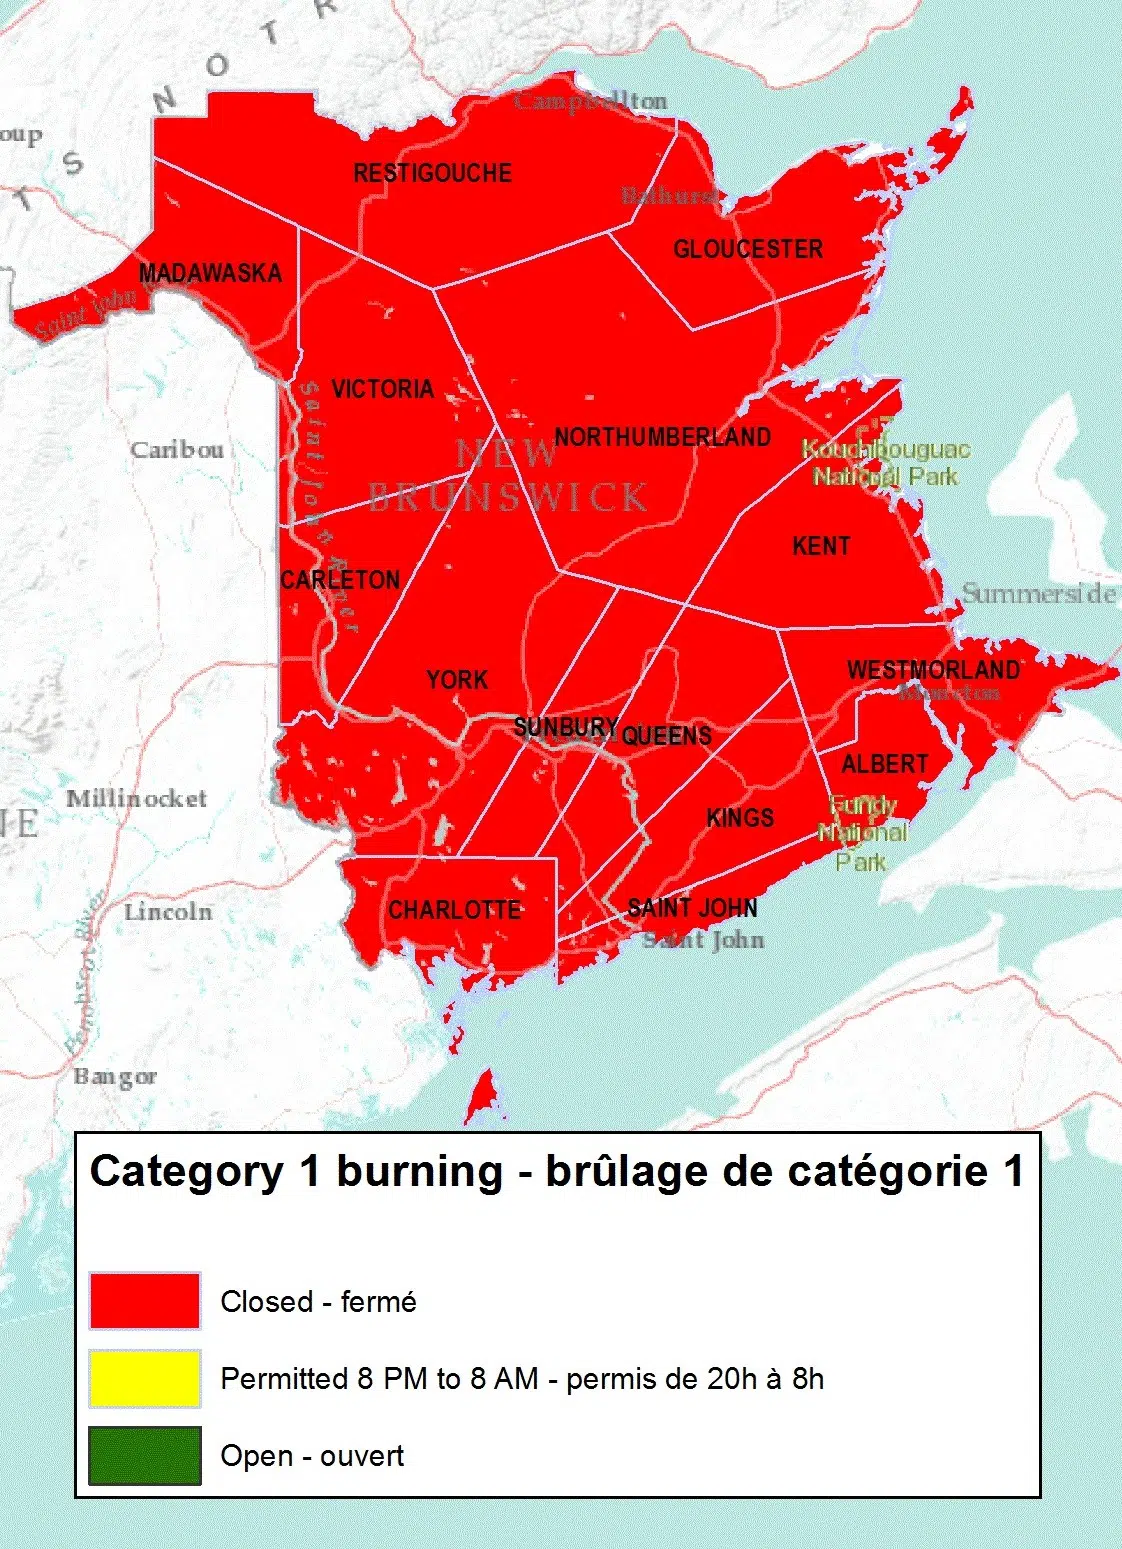 Extremely Dry Conditions Prompt Province-Wide Fire Ban